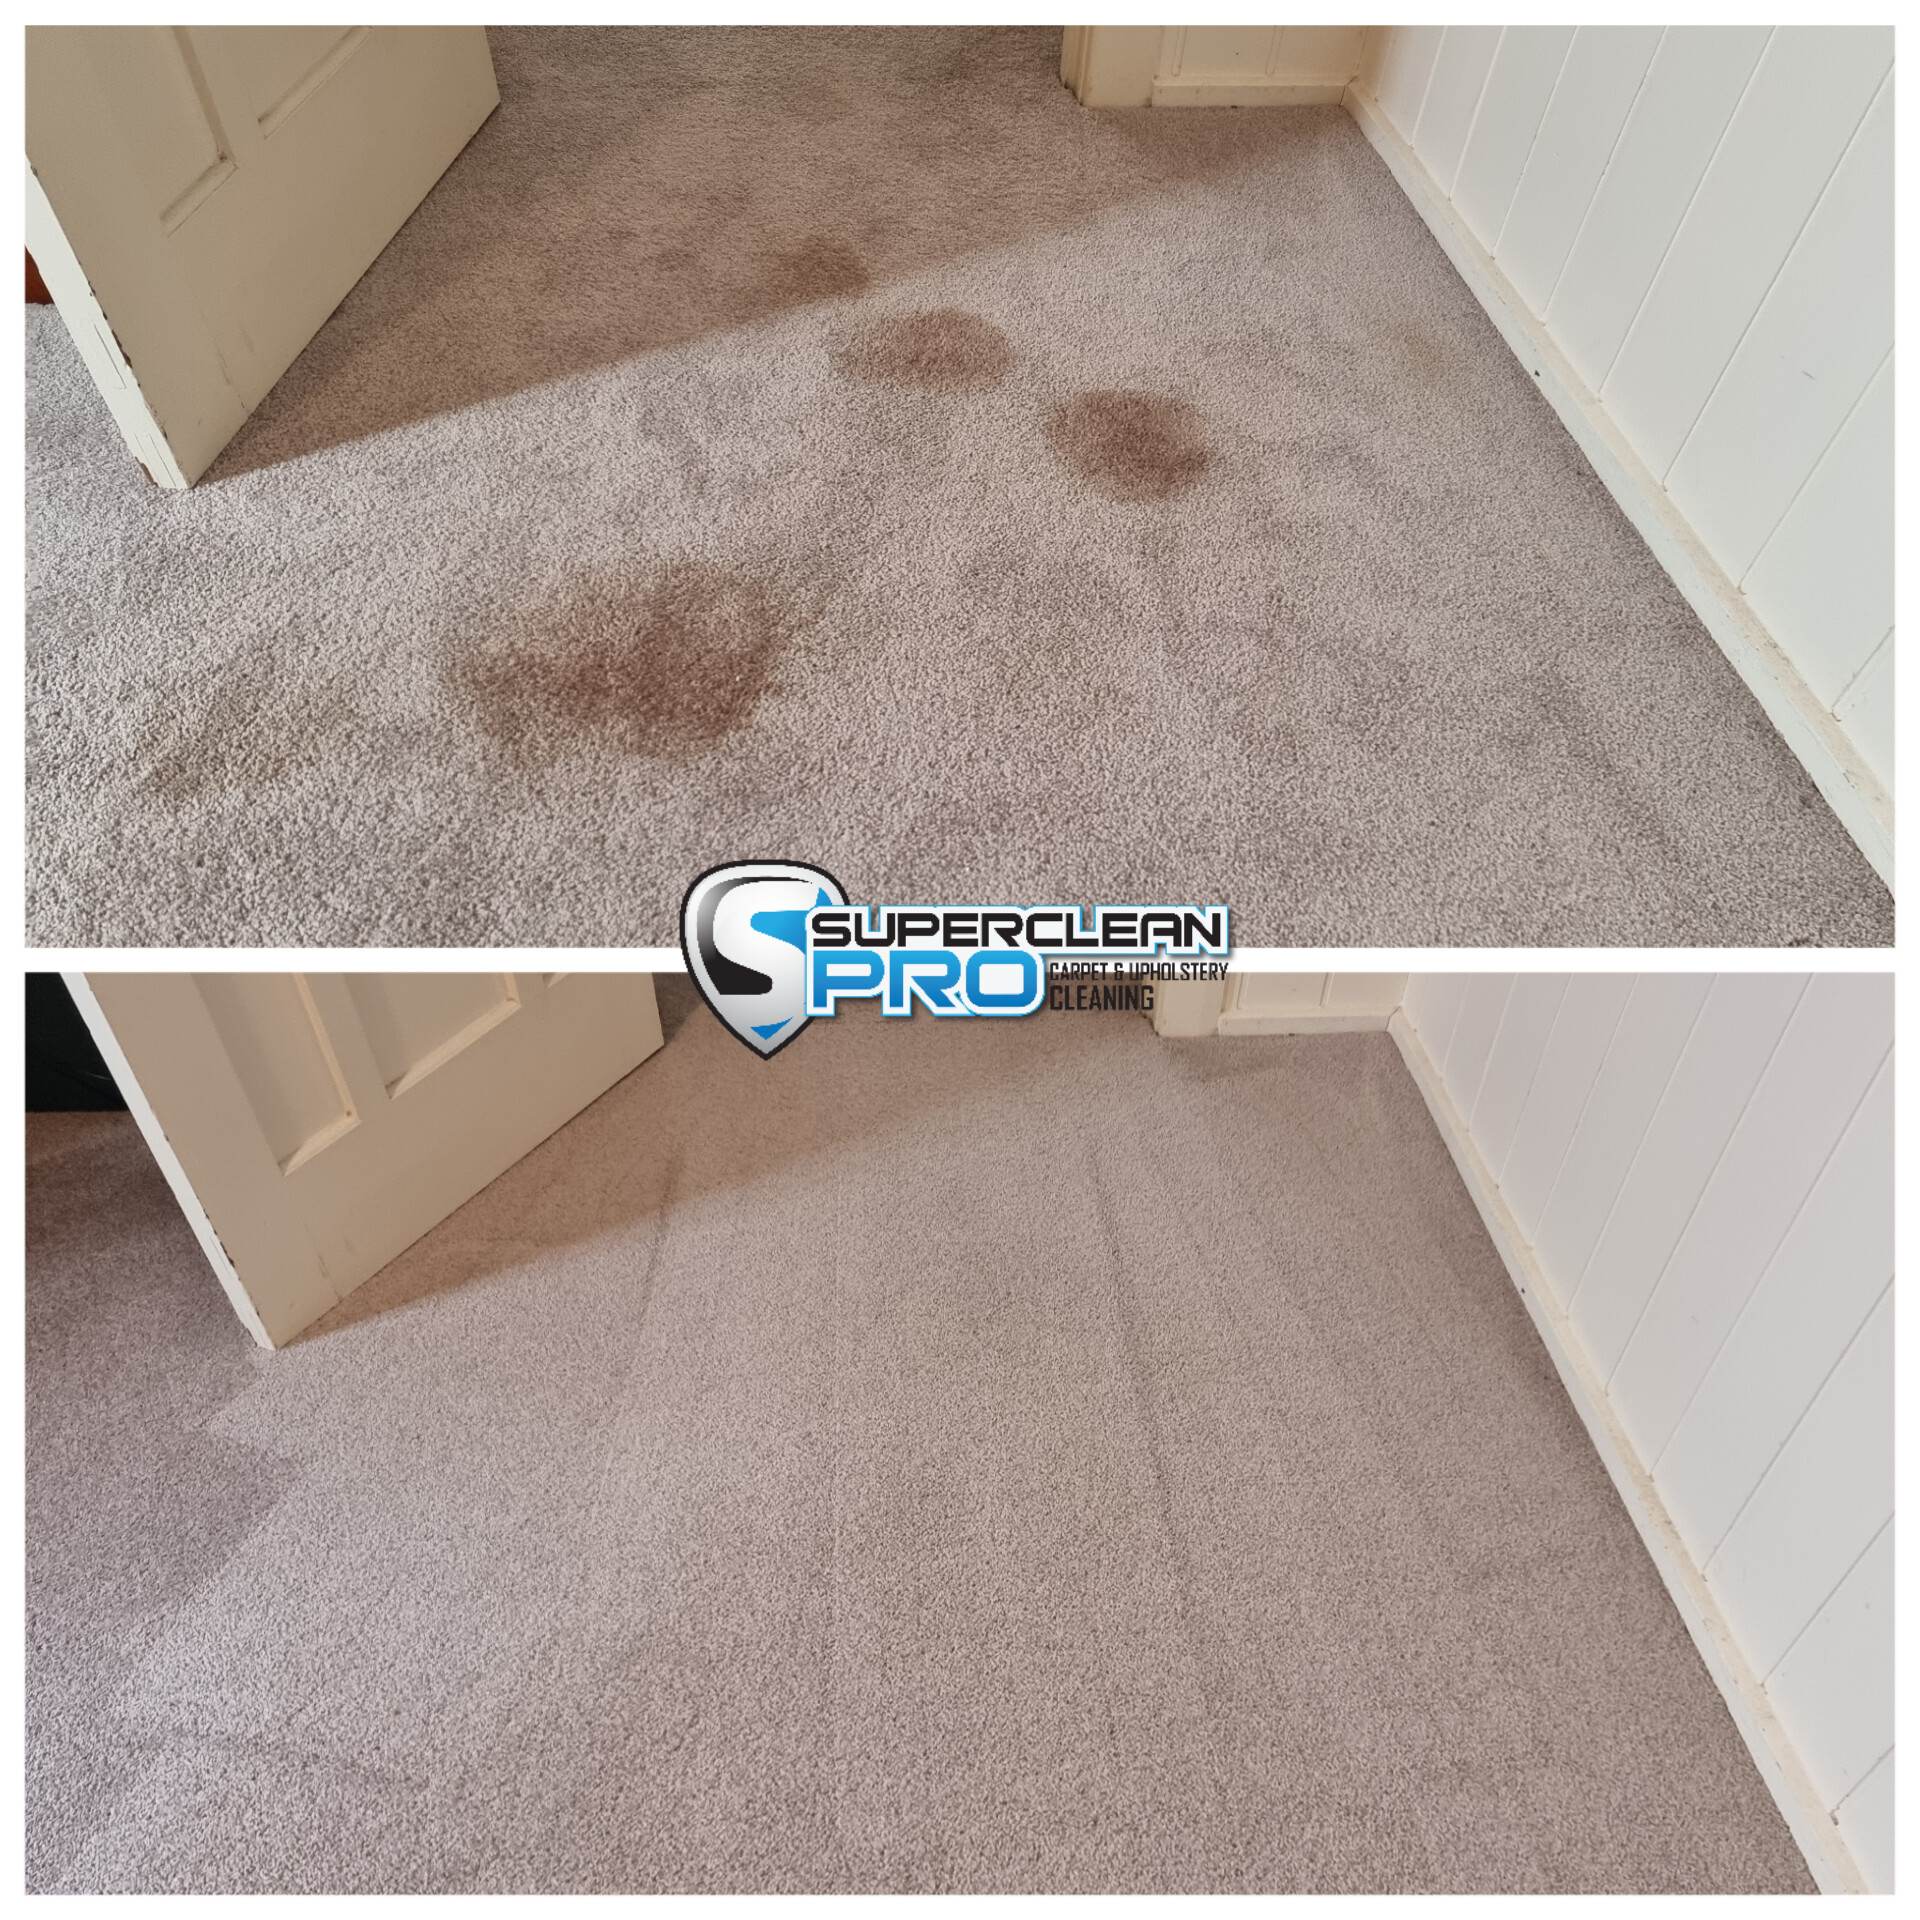 Blog - Super Clean PRO Carpet and Upholstery Cleaning